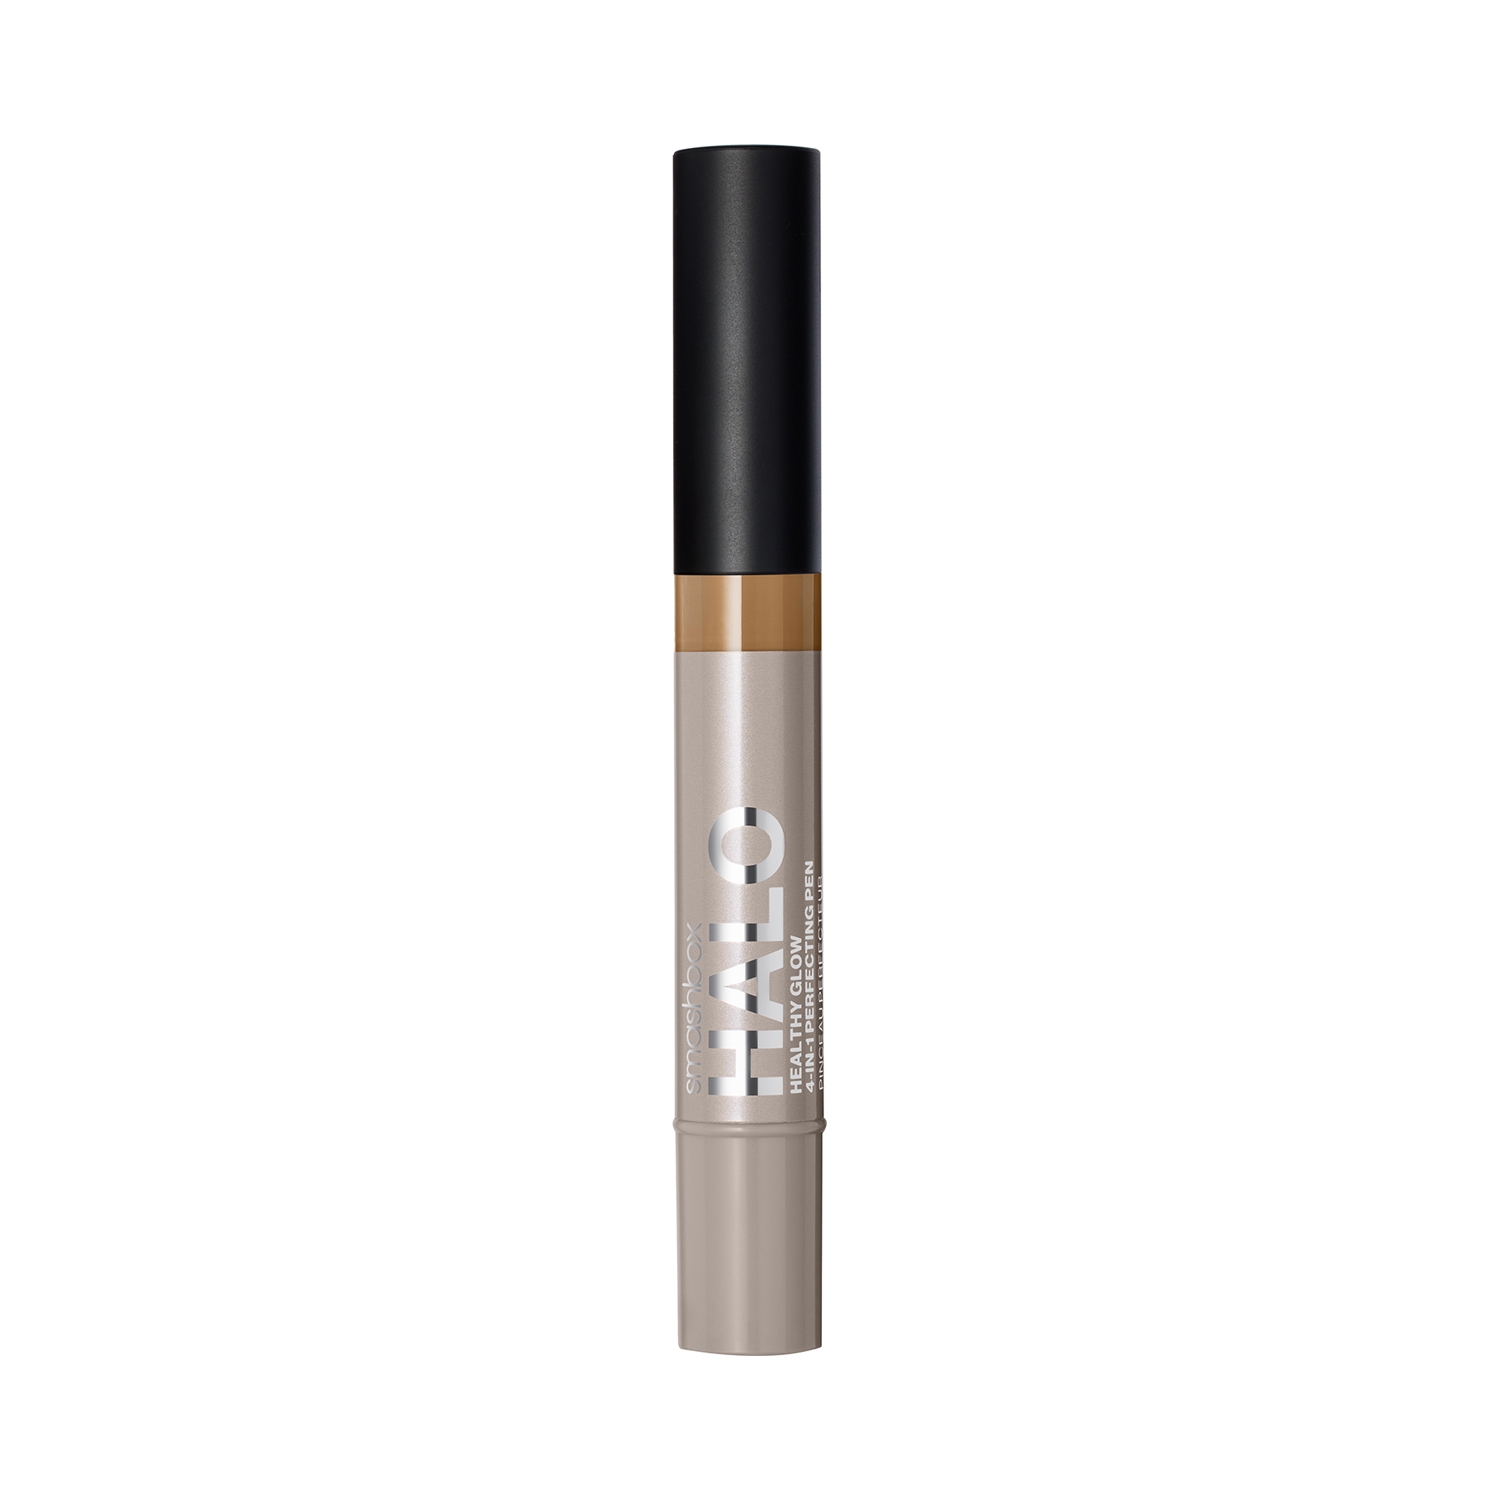 Smashbox | Smashbox Halo Healthy Glow 4-In-1 Perfecting Concealer Pen - T10W (3.5ml)